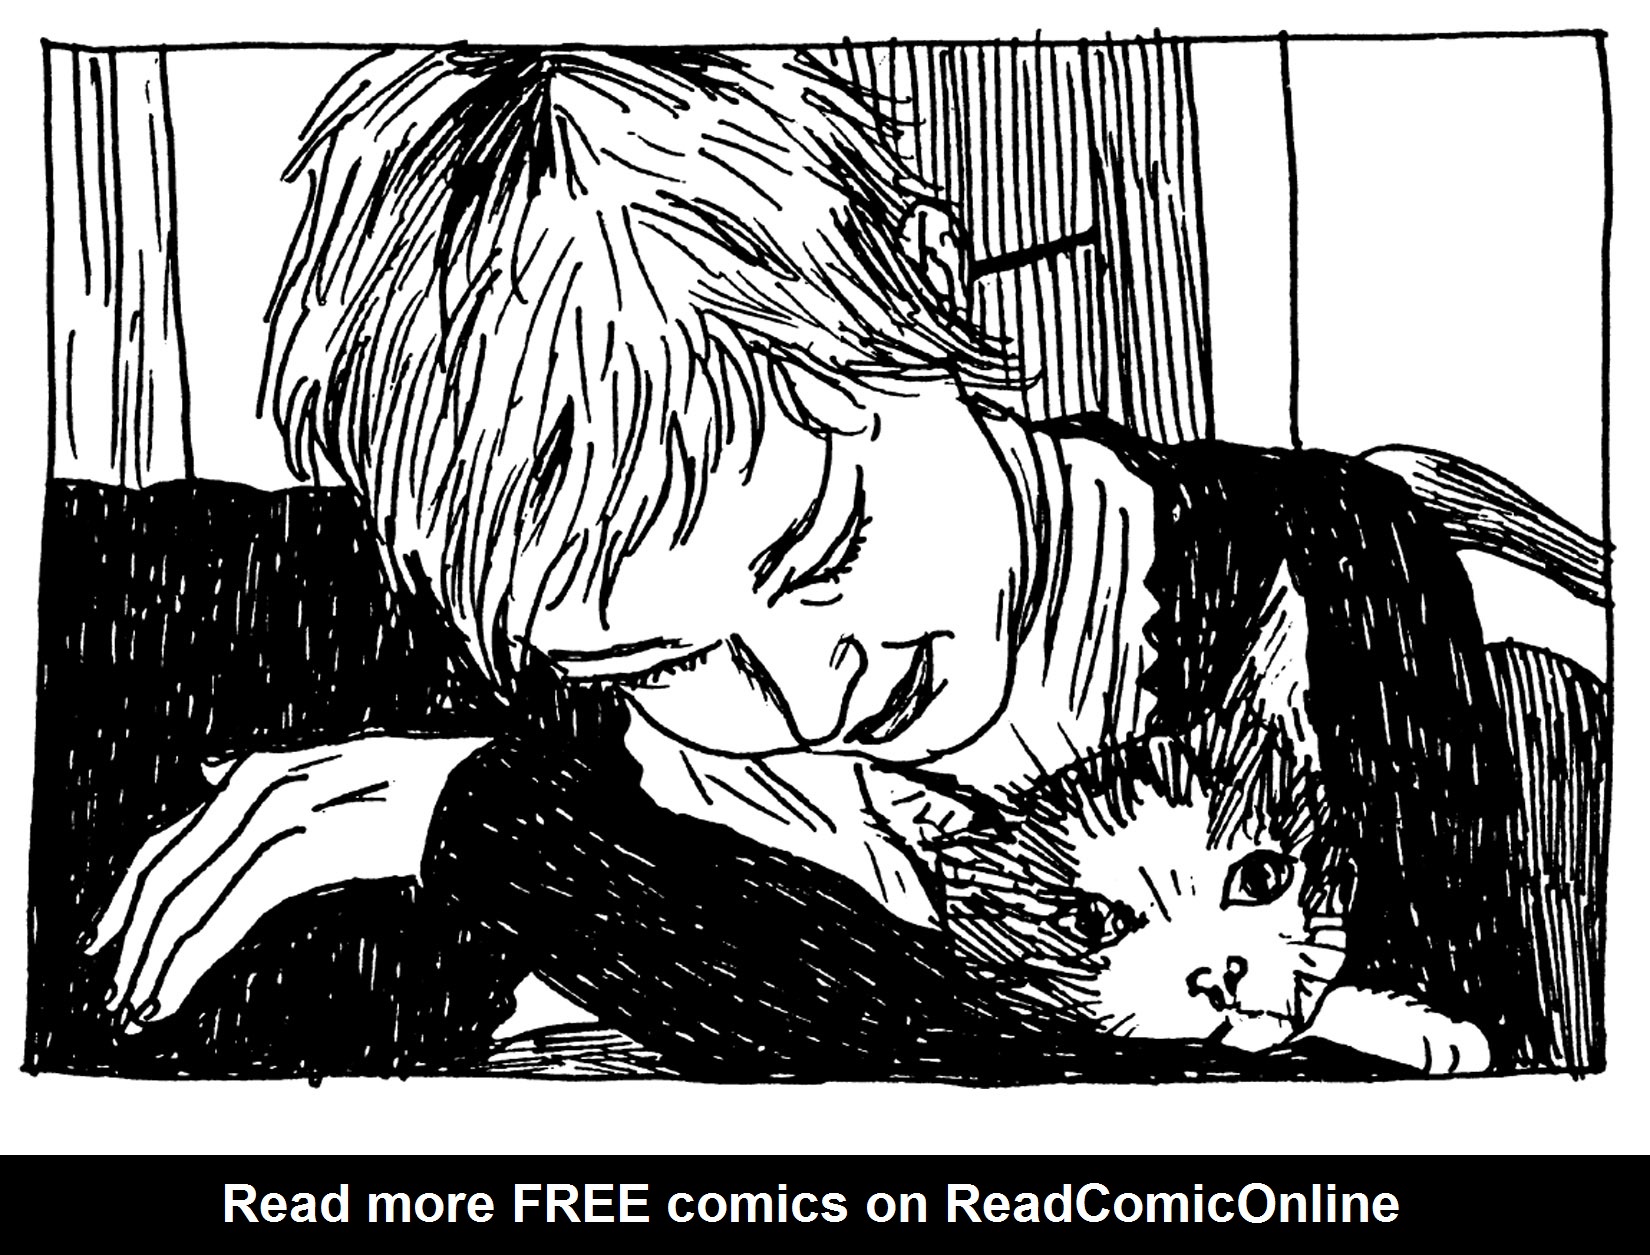 Read online Unlikely comic -  Issue # TPB (Part 1) - 5